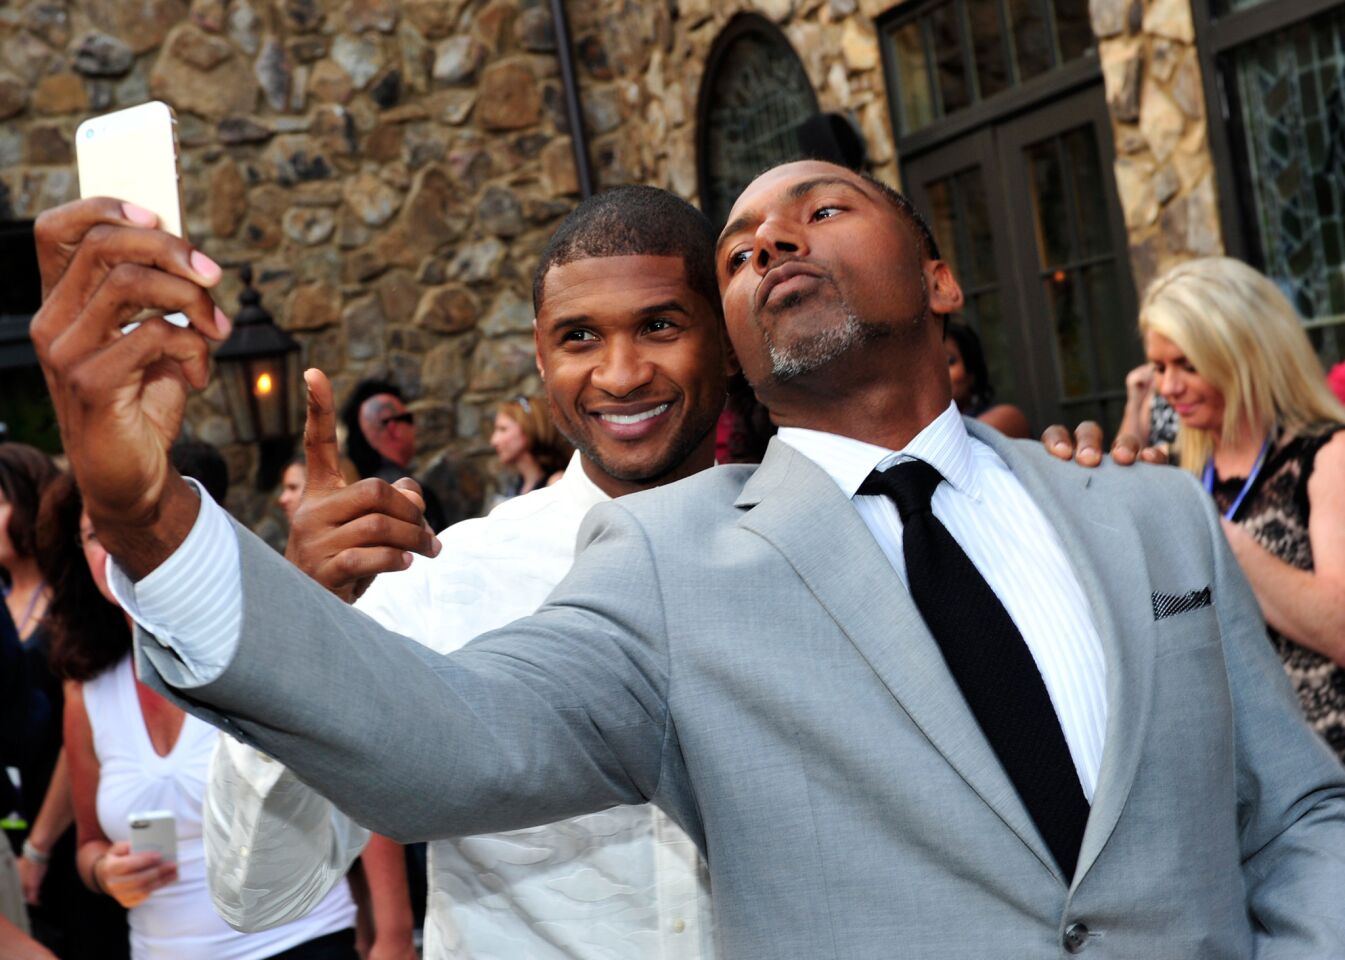 Usher and retired NFL player Allen Rossum attend the 15th anniversary Kick Off Celebration of Usher's New Look Foundation on July 30, 2014, in Atlanta.